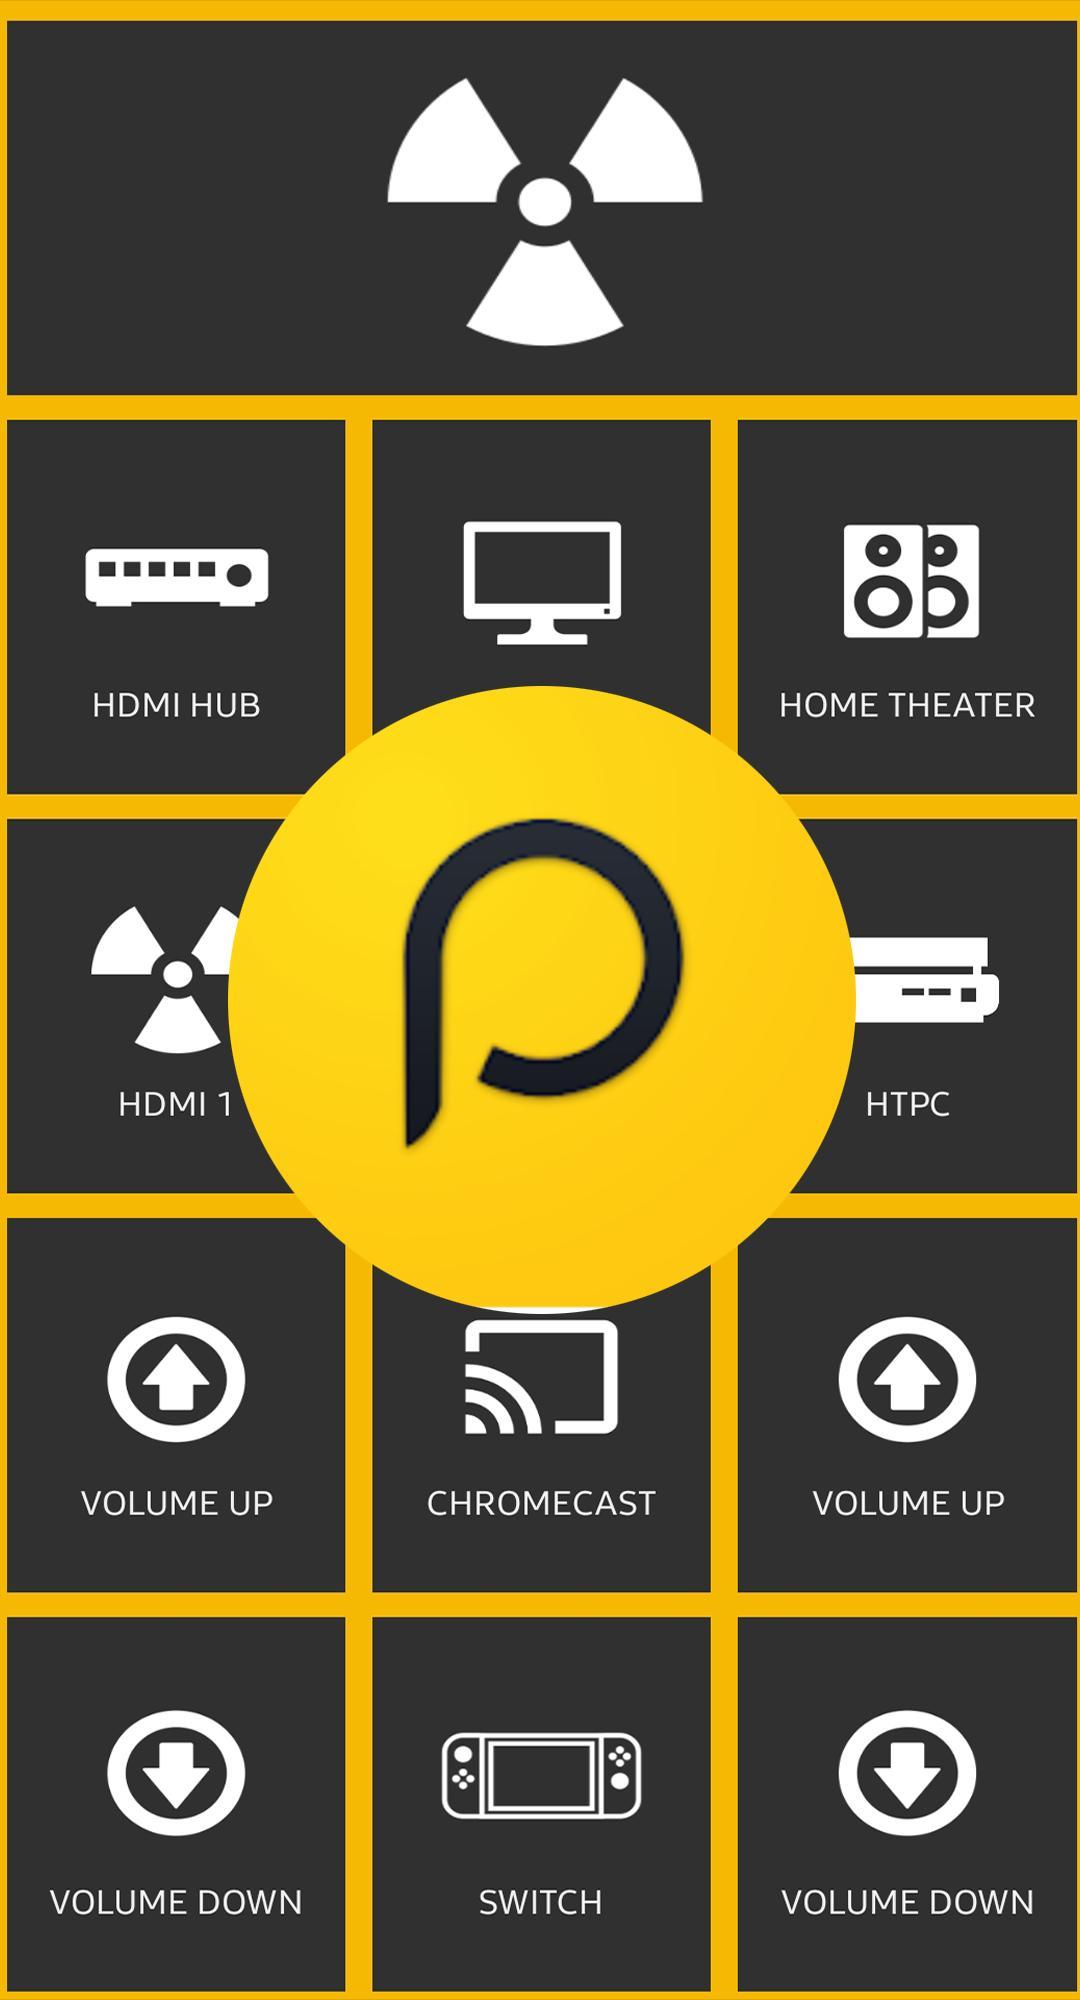 Peel Smart Remote for Android - APK Download